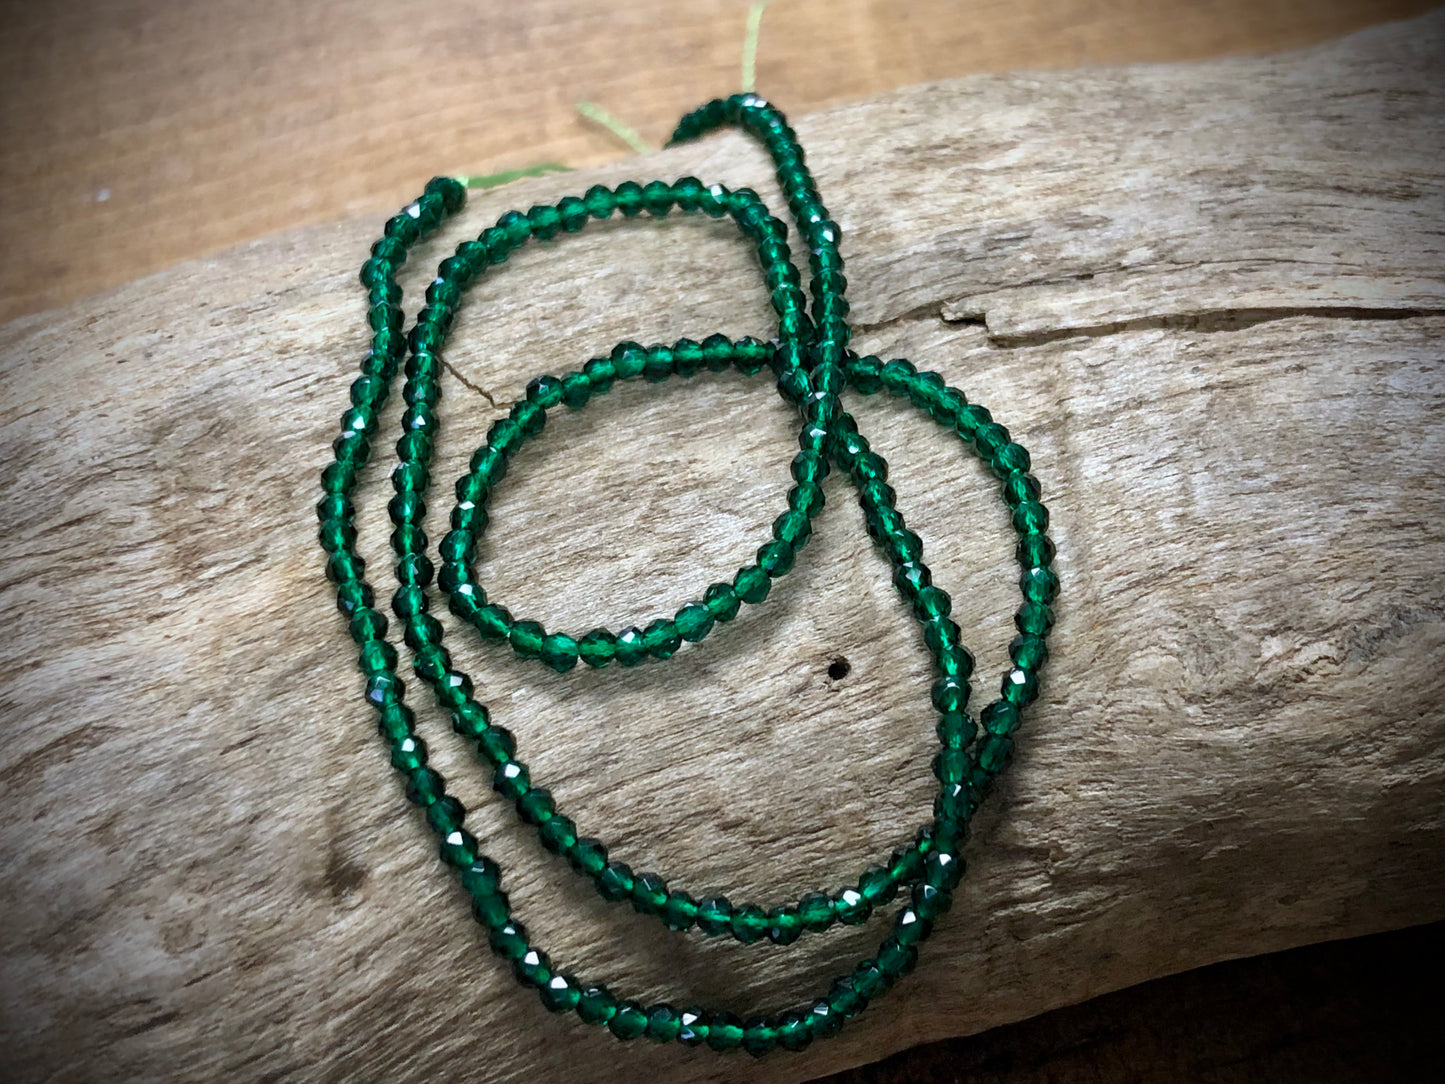 Thunder Polish Glass Faceted Rounds Strand - Emerald Green - 2mm - 14”